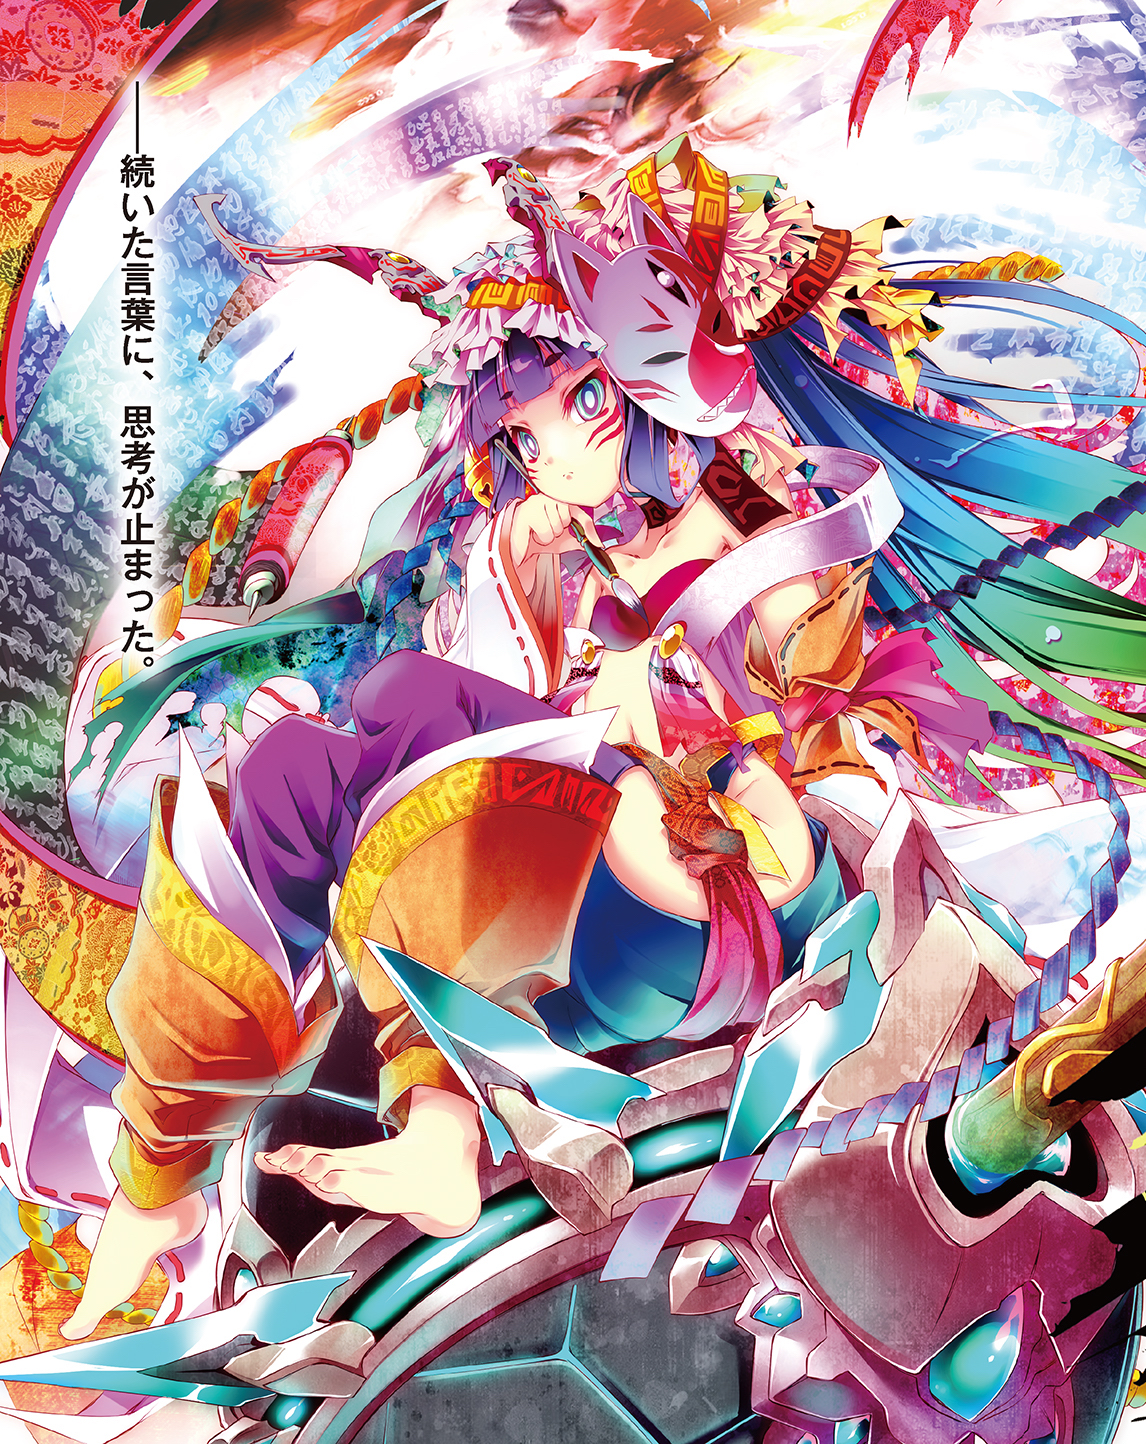 The Best No Game No Life Characters, Ranked – 9 Tailed Kitsune